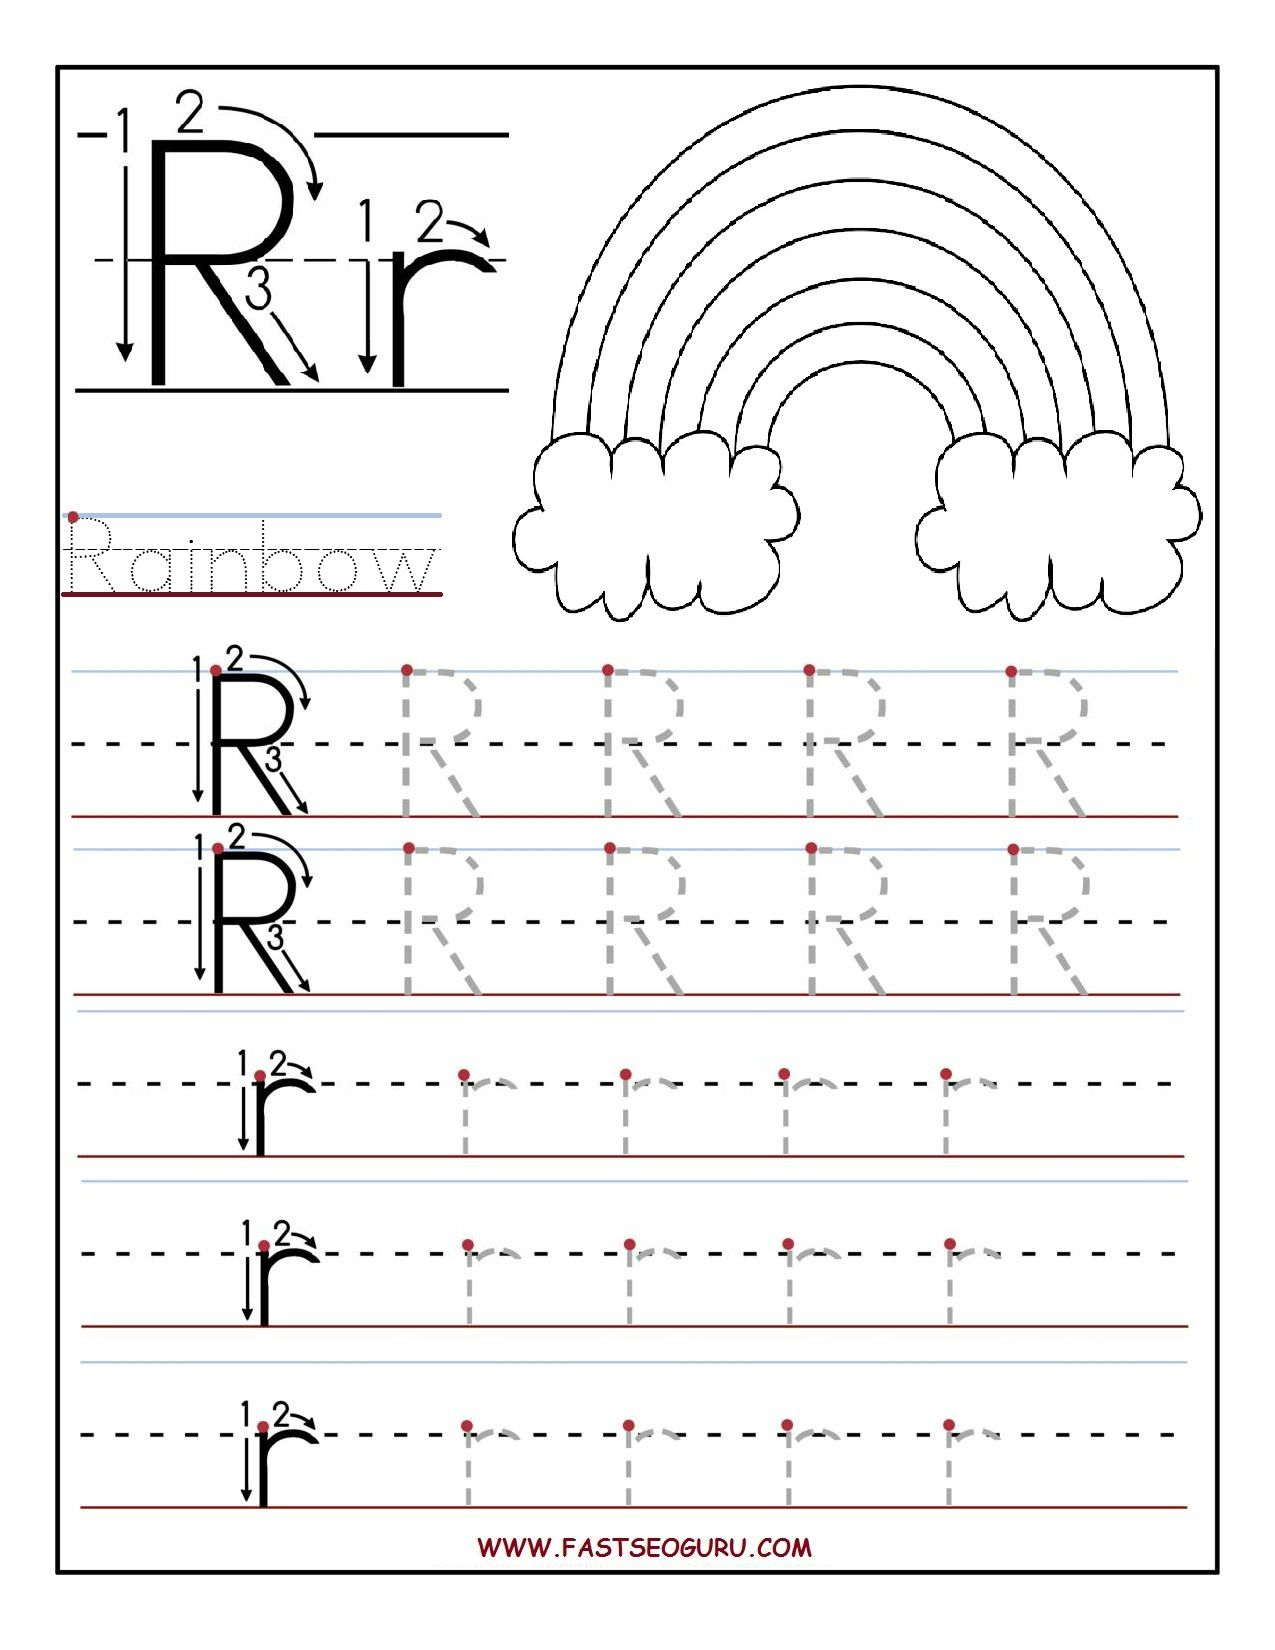 Printable Letter R Tracing Worksheets For Preschool | Letter with Letter P Tracing For Preschool